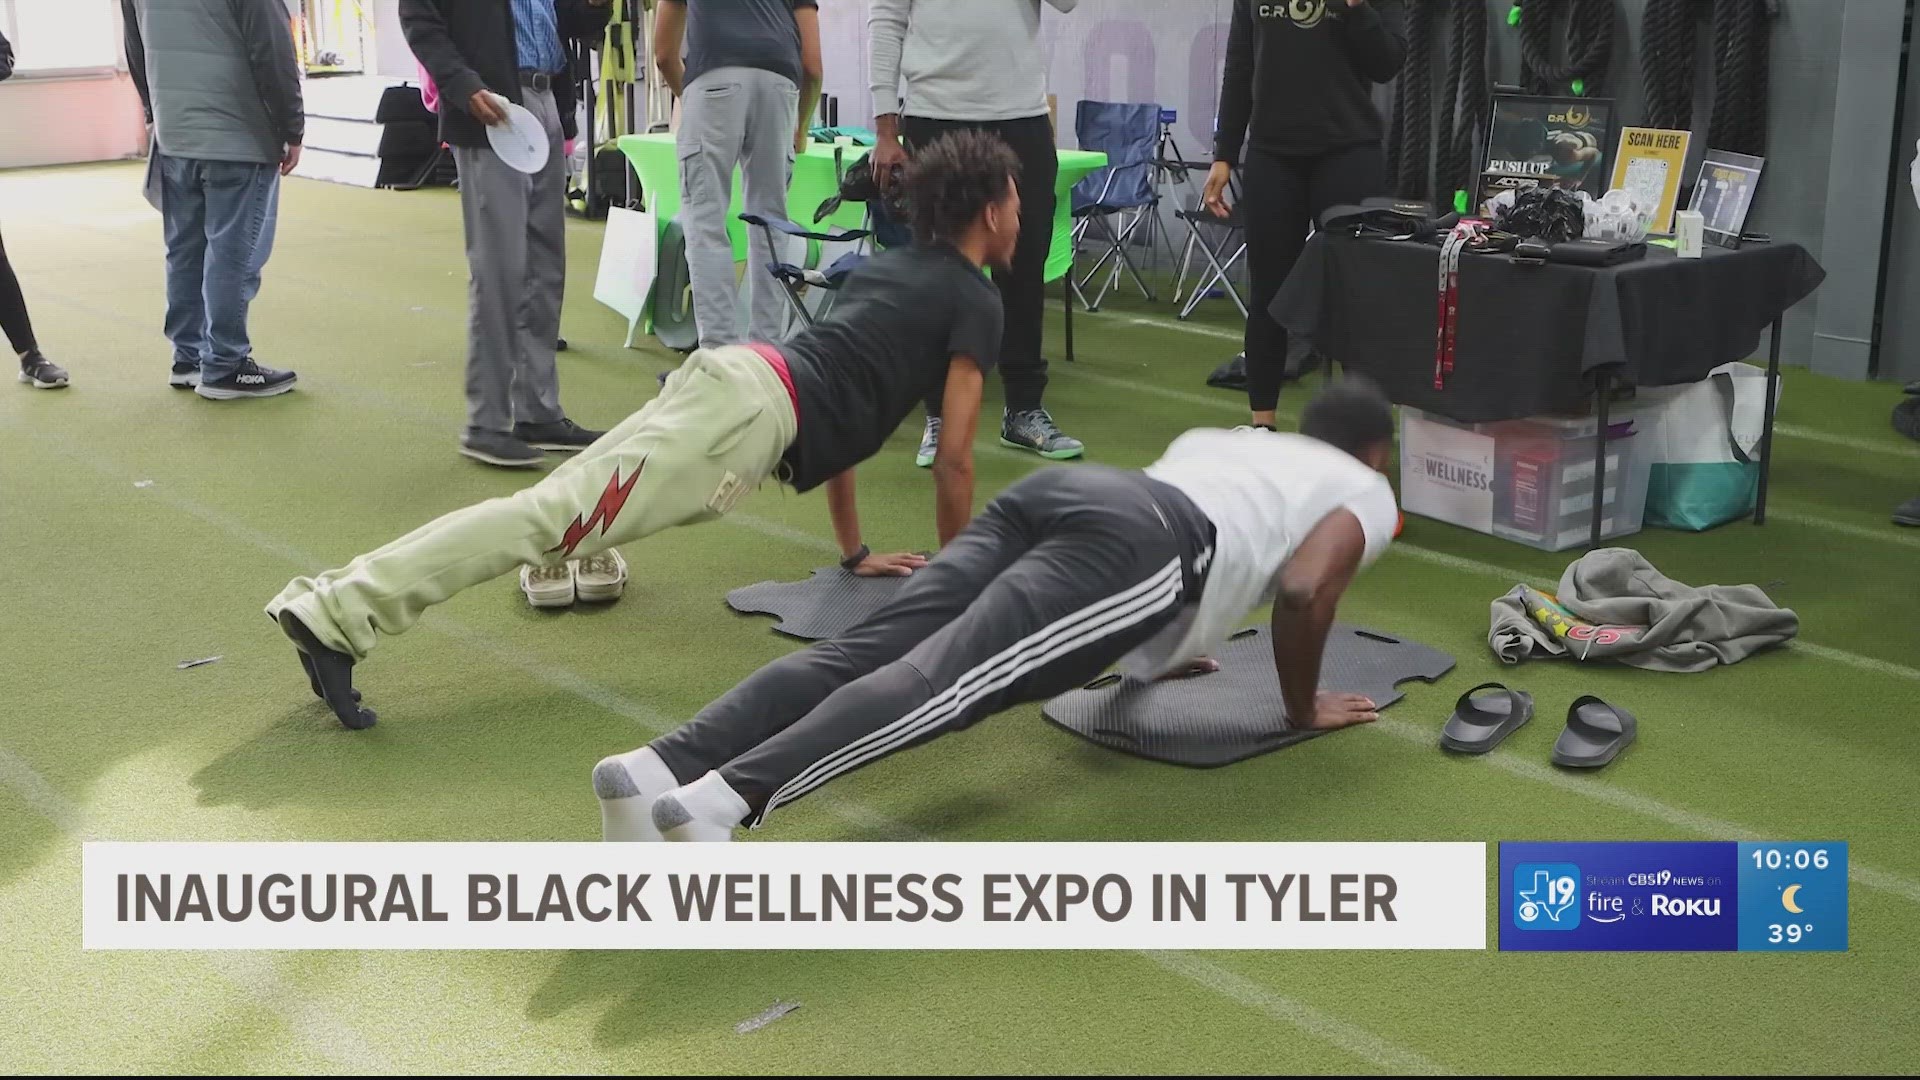 Wellness expo in Tyler for Black community showcases holistic health resources